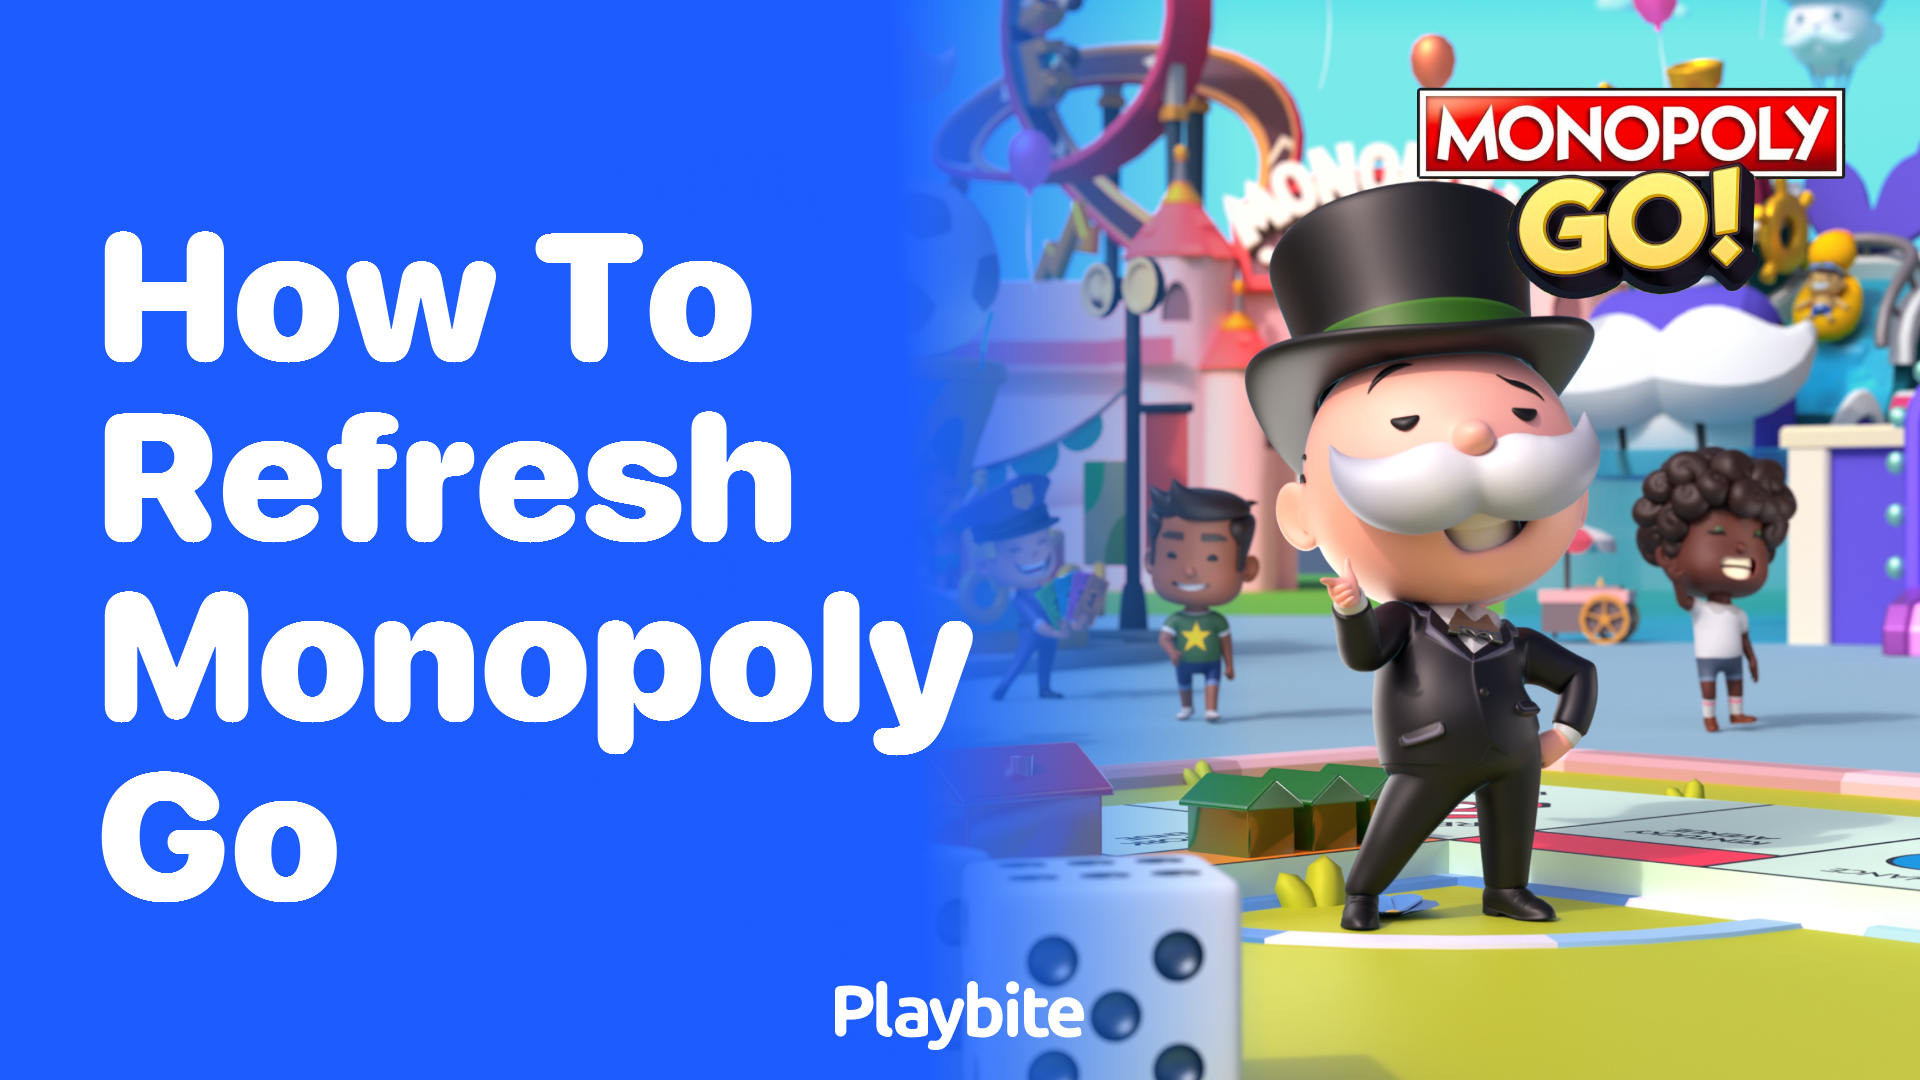 How to Refresh Monopoly Go for Uninterrupted Fun